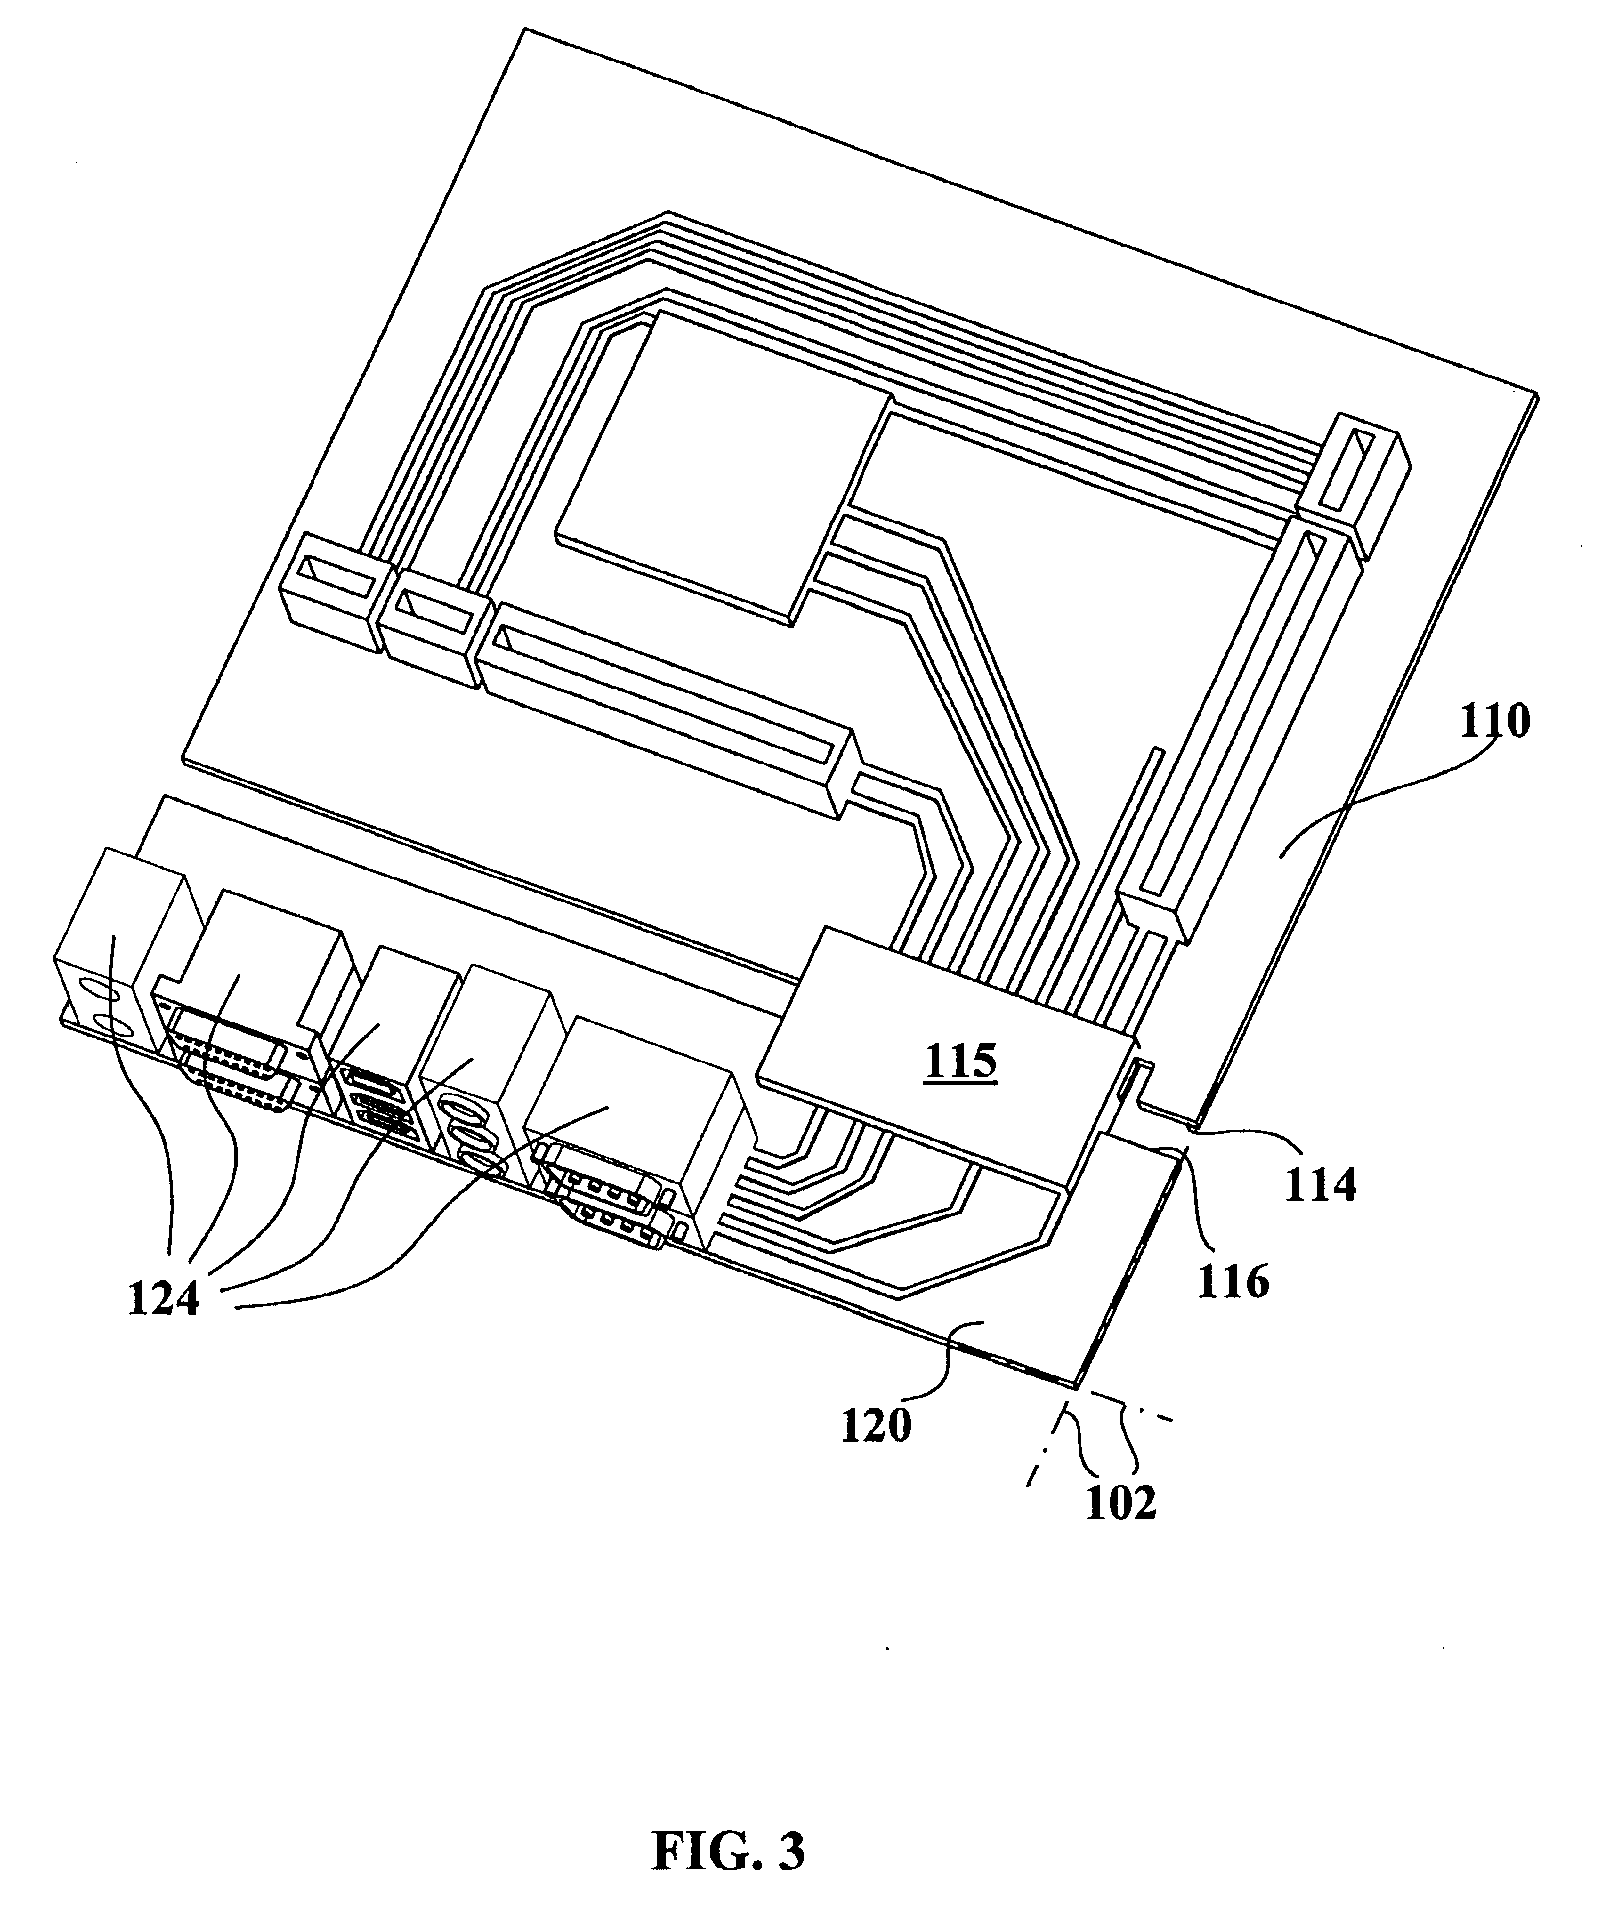 Computer system having customizable printed circuit boards